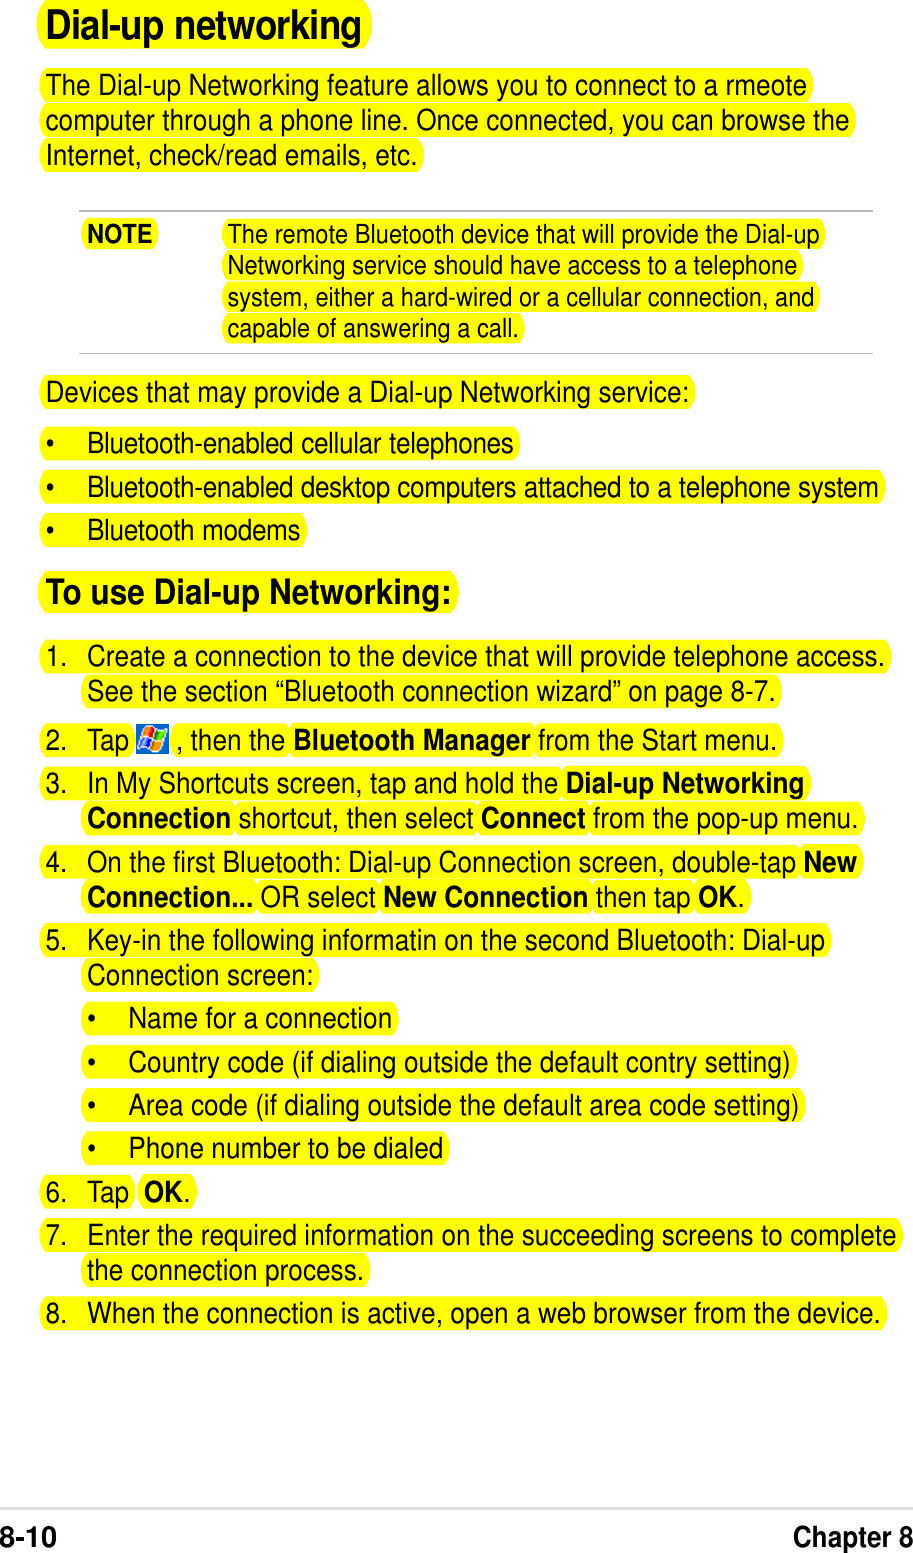 8-10Chapter 8Dial-up networkingThe Dial-up Networking feature allows you to connect to a rmeotecomputer through a phone line. Once connected, you can browse theInternet, check/read emails, etc.NOTE The remote Bluetooth device that will provide the Dial-upNetworking service should have access to a telephonesystem, either a hard-wired or a cellular connection, andcapable of answering a call.Devices that may provide a Dial-up Networking service:•Bluetooth-enabled cellular telephones•Bluetooth-enabled desktop computers attached to a telephone system•Bluetooth modemsTo use Dial-up Networking:1. Create a connection to the device that will provide telephone access.See the section “Bluetooth connection wizard” on page 8-7.2. Tap   , then the Bluetooth Manager from the Start menu.3. In My Shortcuts screen, tap and hold the Dial-up NetworkingConnection shortcut, then select Connect from the pop-up menu.4. On the first Bluetooth: Dial-up Connection screen, double-tap NewConnection... OR select New Connection then tap OK.5. Key-in the following informatin on the second Bluetooth: Dial-upConnection screen:•Name for a connection•Country code (if dialing outside the default contry setting)•Area code (if dialing outside the default area code setting)•Phone number to be dialed6. Tap  OK.7. Enter the required information on the succeeding screens to completethe connection process.8. When the connection is active, open a web browser from the device.